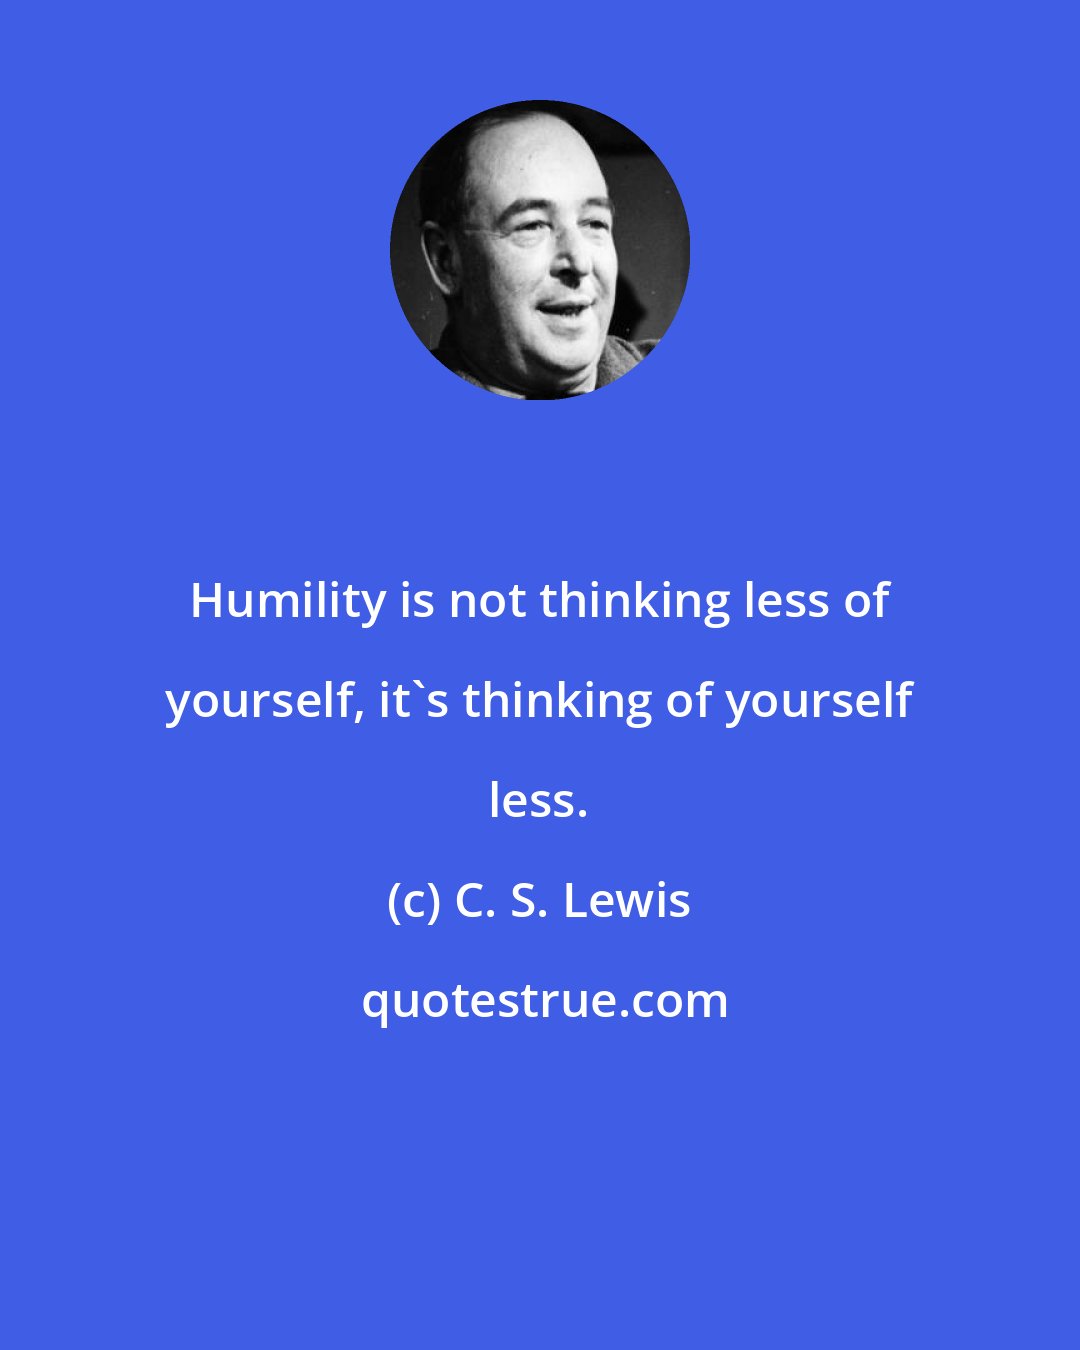 C. S. Lewis: Humility is not thinking less of yourself, it's thinking of yourself less.